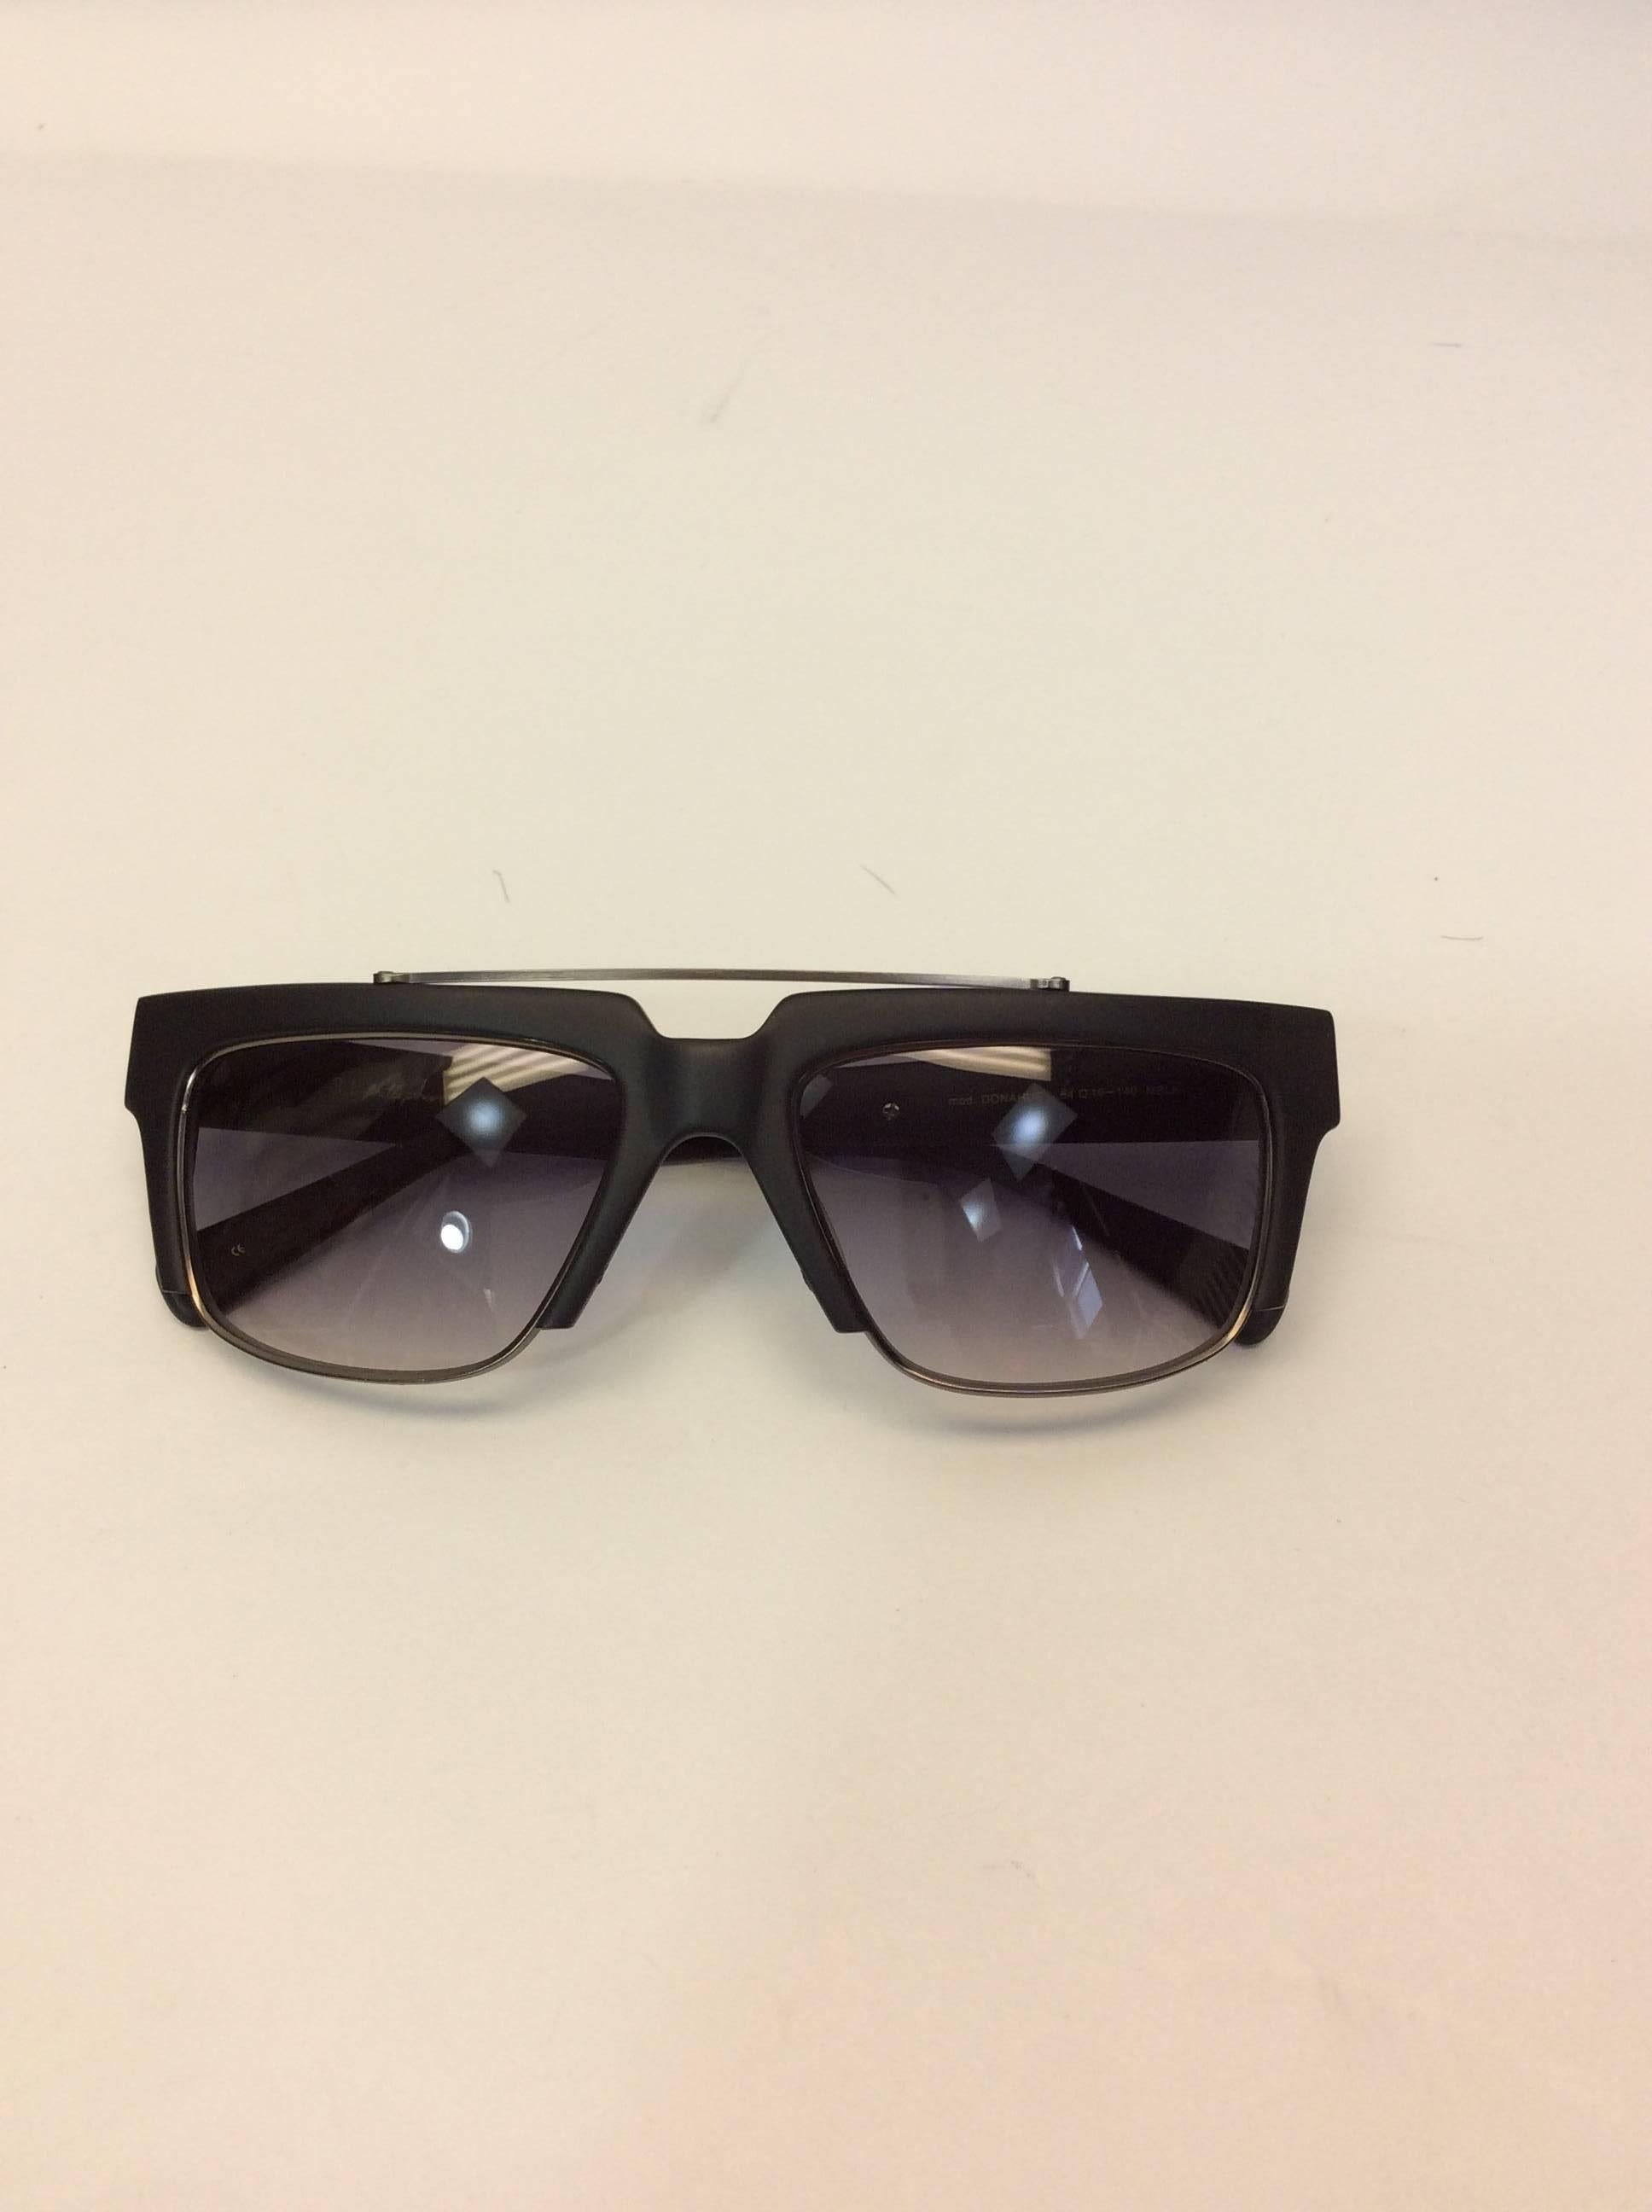 Phillip Lim Donahoue Mod Black Square Sunglasses
Comes with case
$165
Silver metal top detail on the the frame
